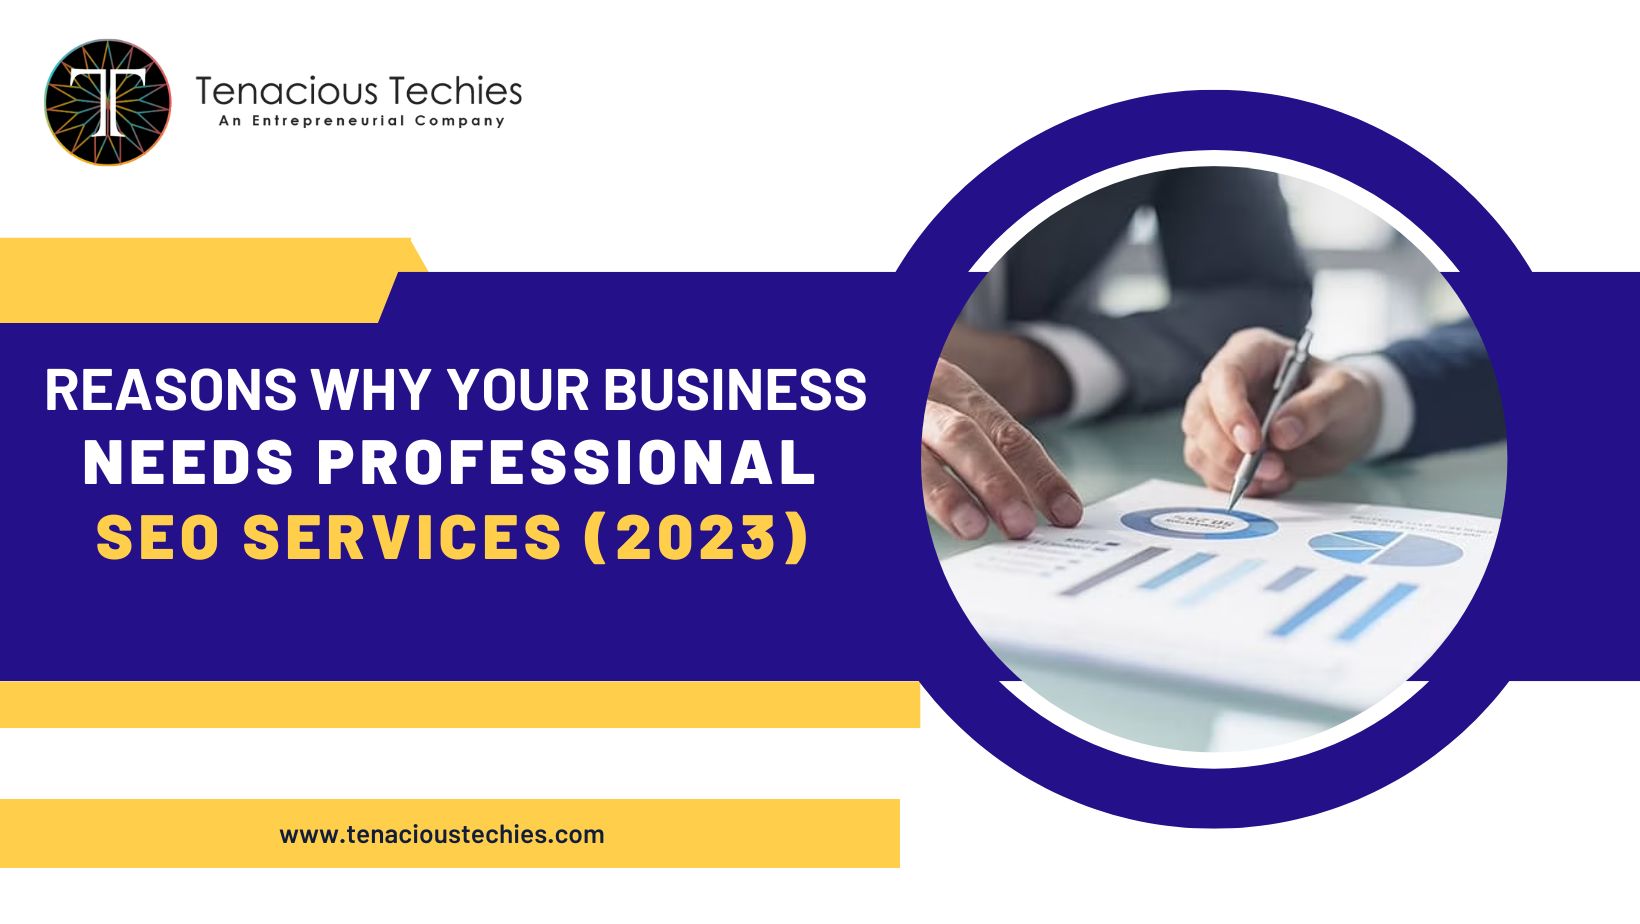 Reasons Why Your Business Needs Professional SEO Services (2023)